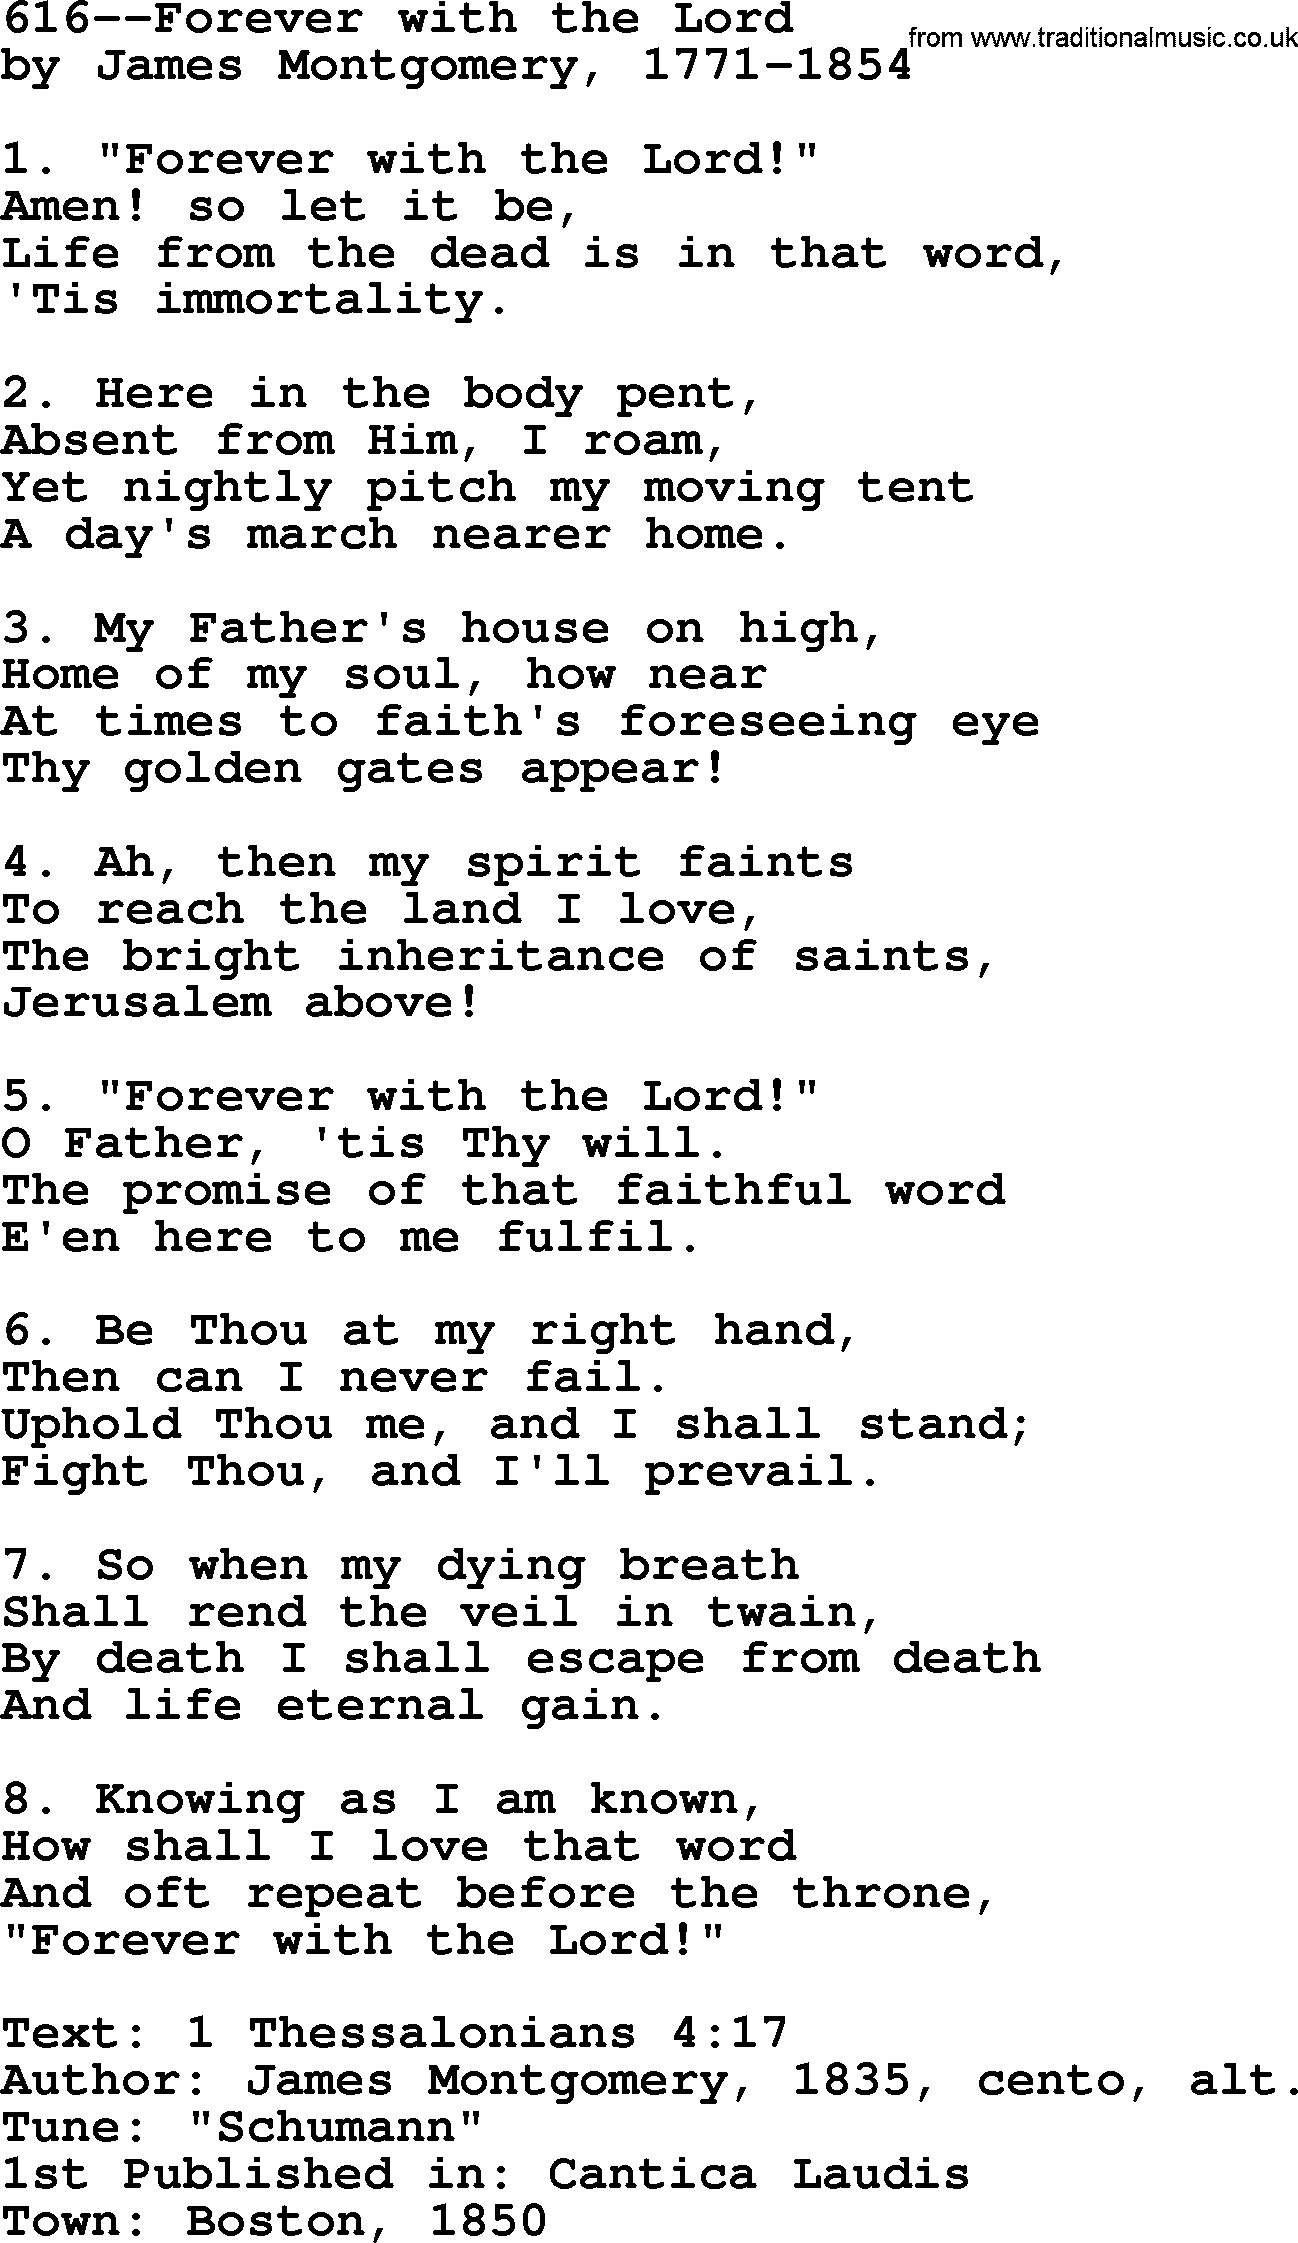 Lutheran Hymn: 616--Forever with the Lord.txt lyrics with PDF